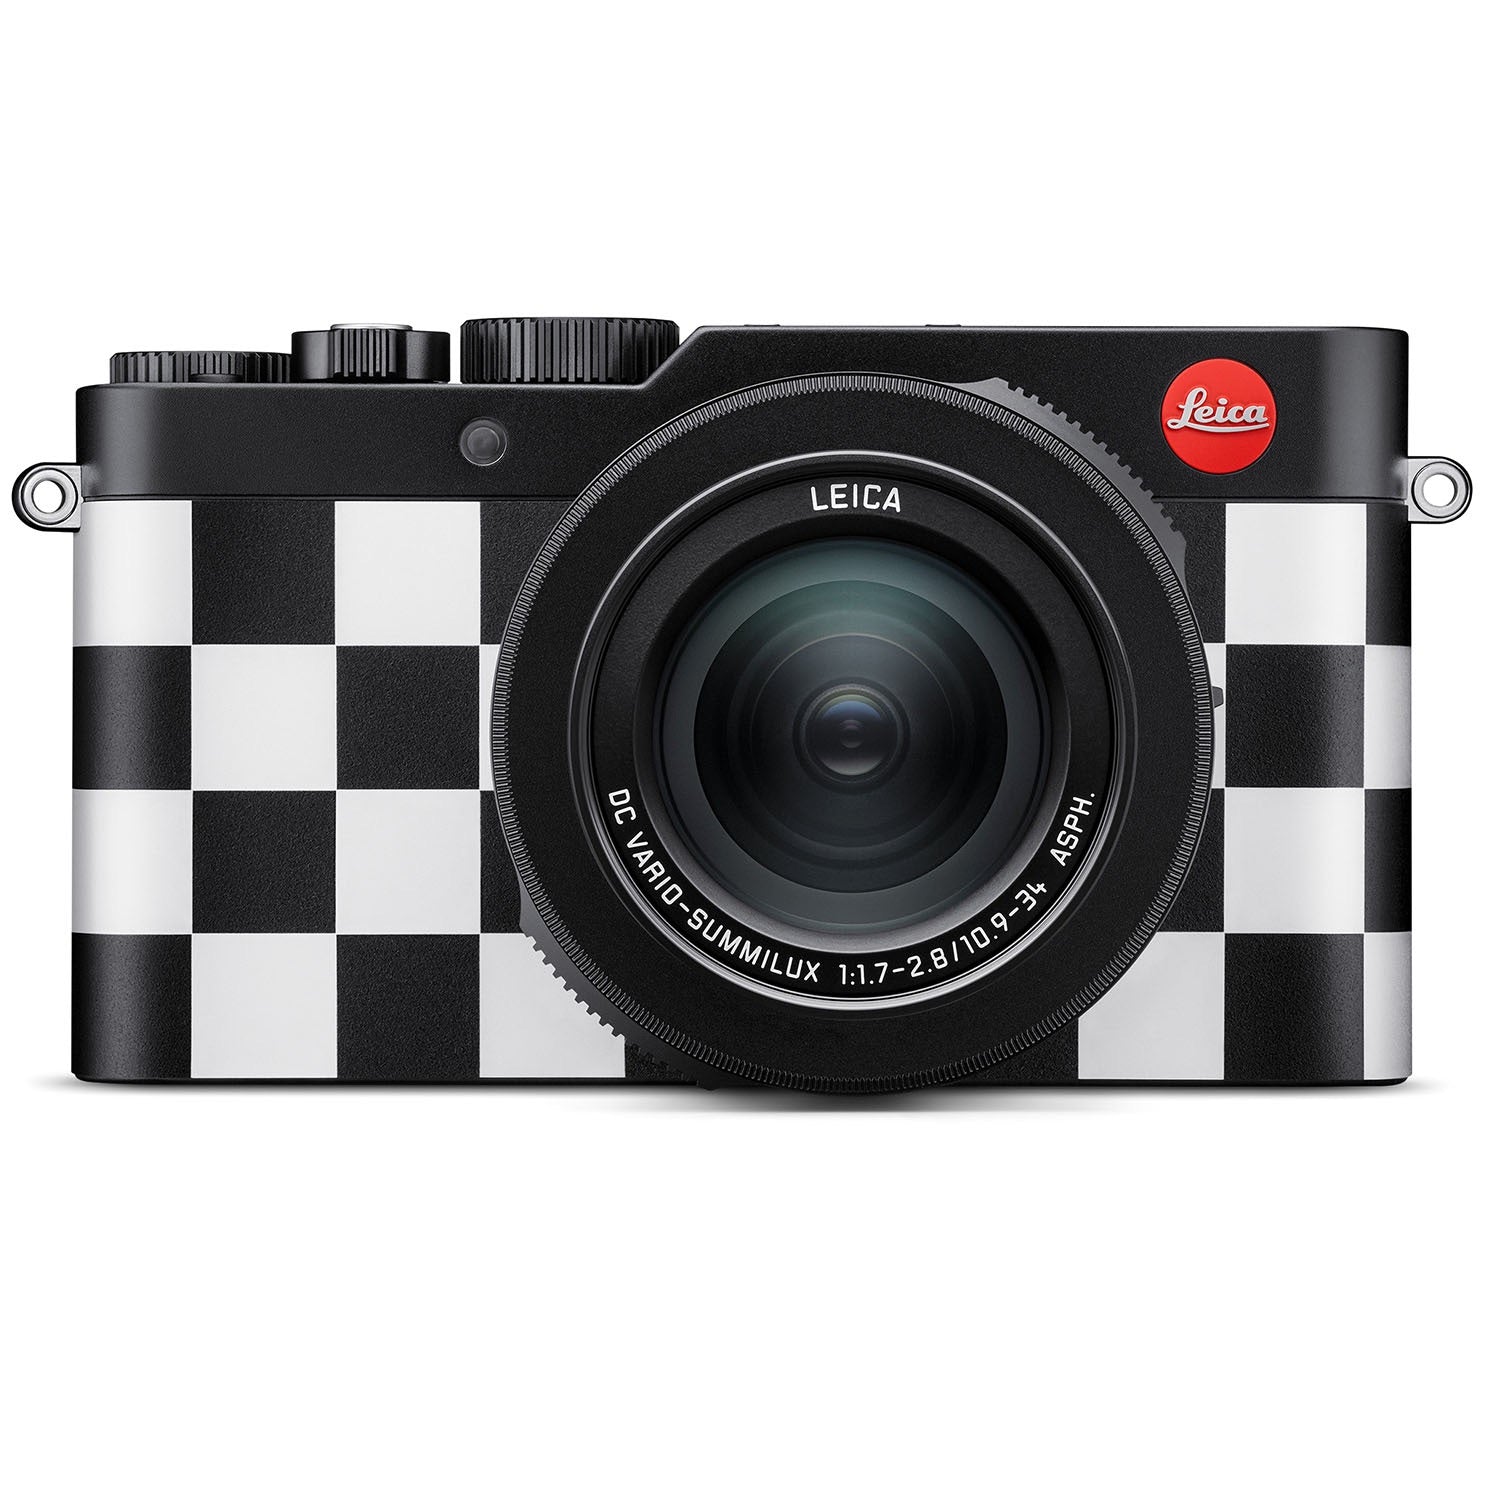 Leica D-lux - Beginners Guide on How to Use the Camera!! 